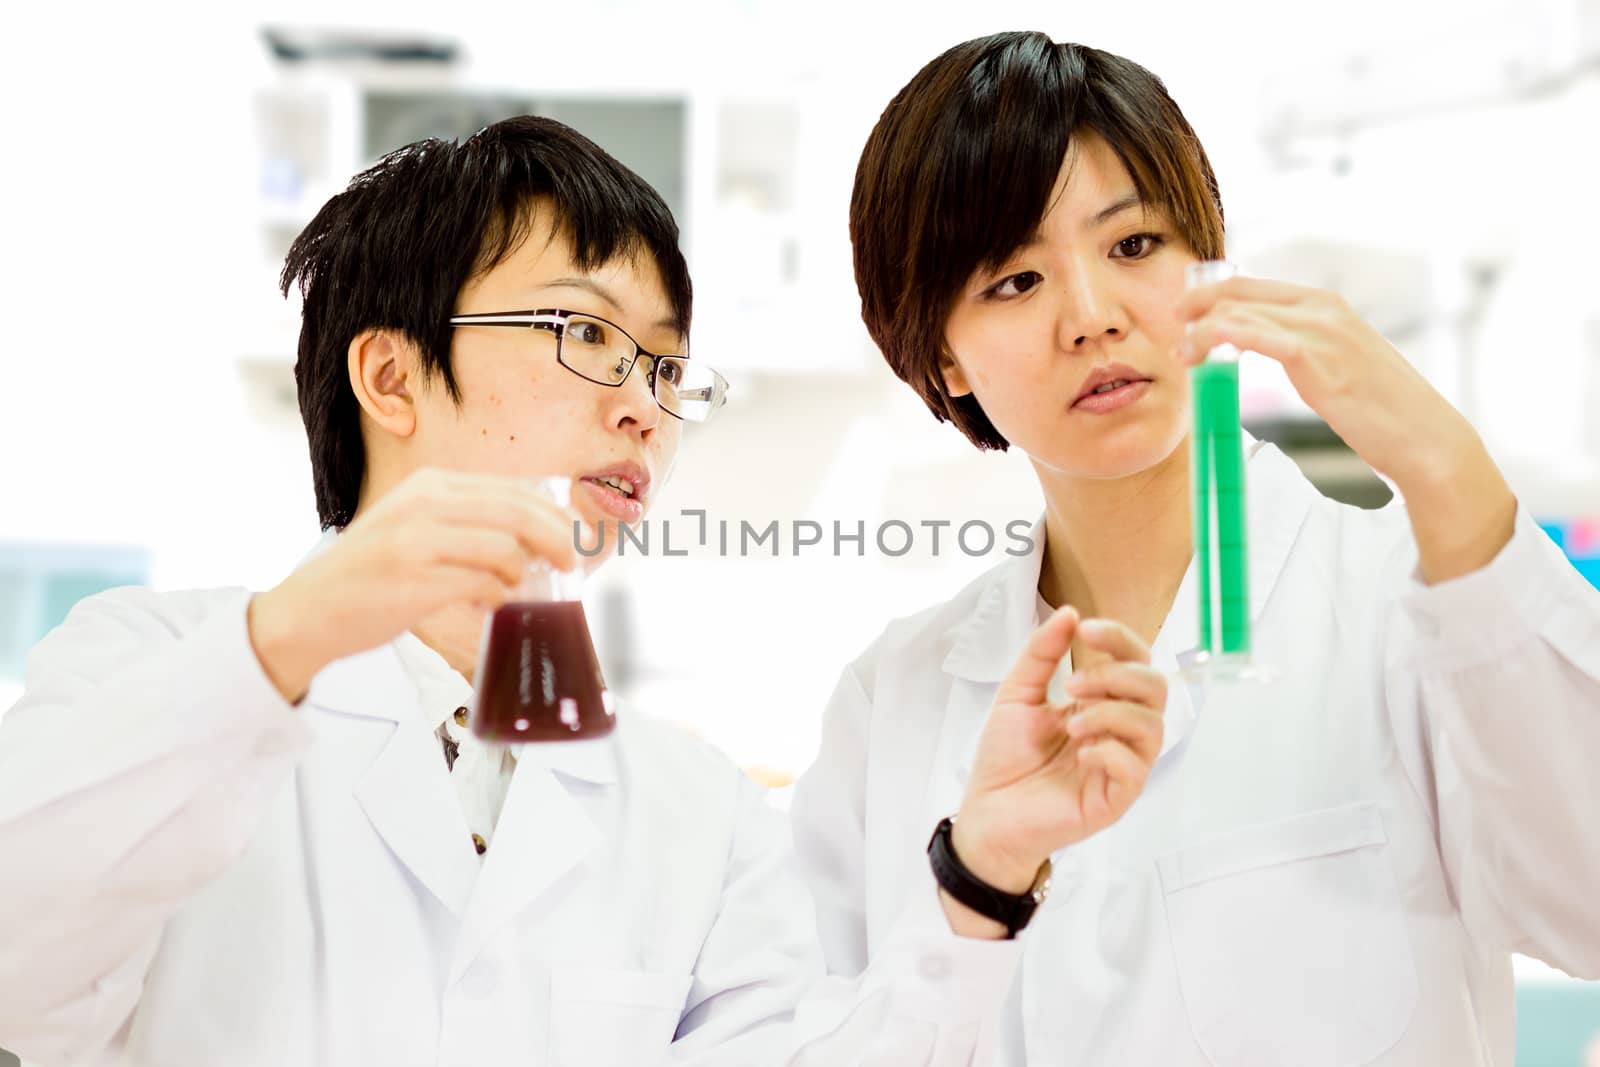 Chinese female scientists in lab by imagesbykenny